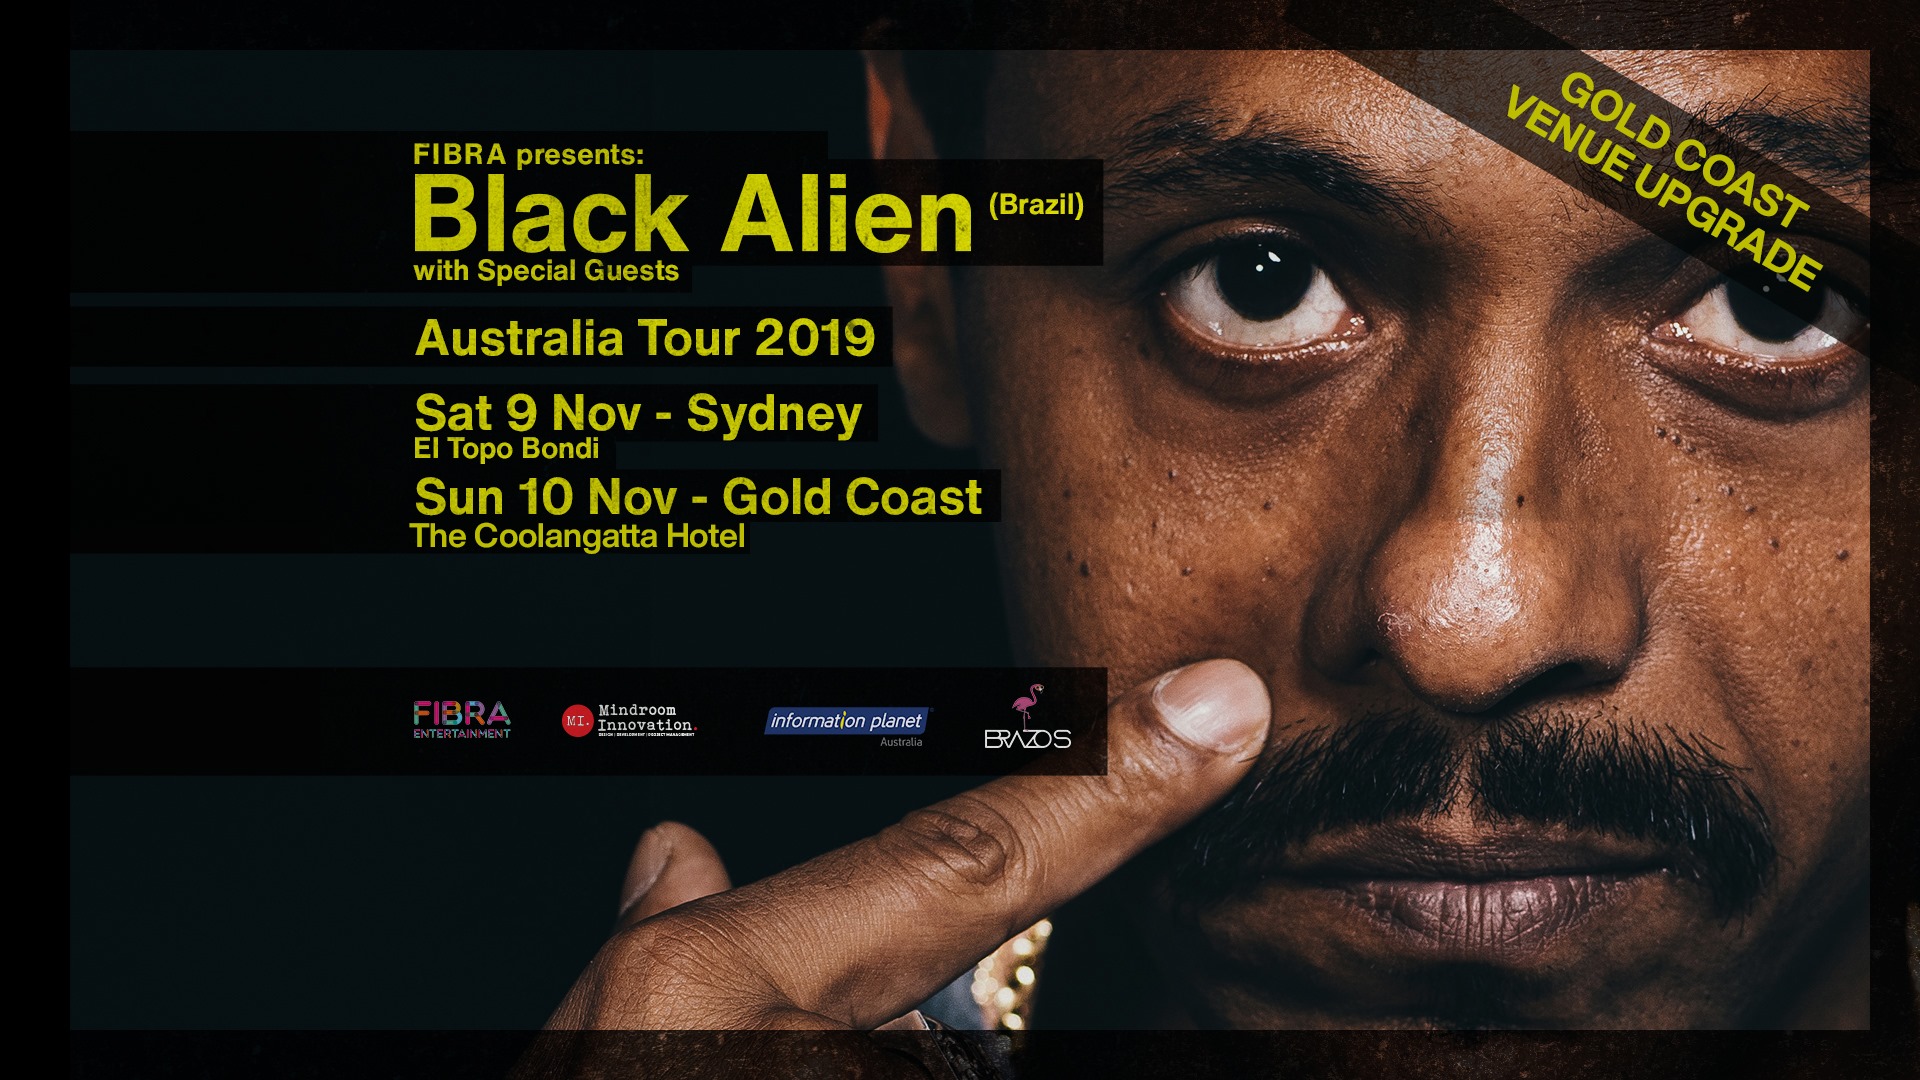 Fill in to have the chance to WIN a ticket to Black Alien on 10/11 – GOLD COAST.